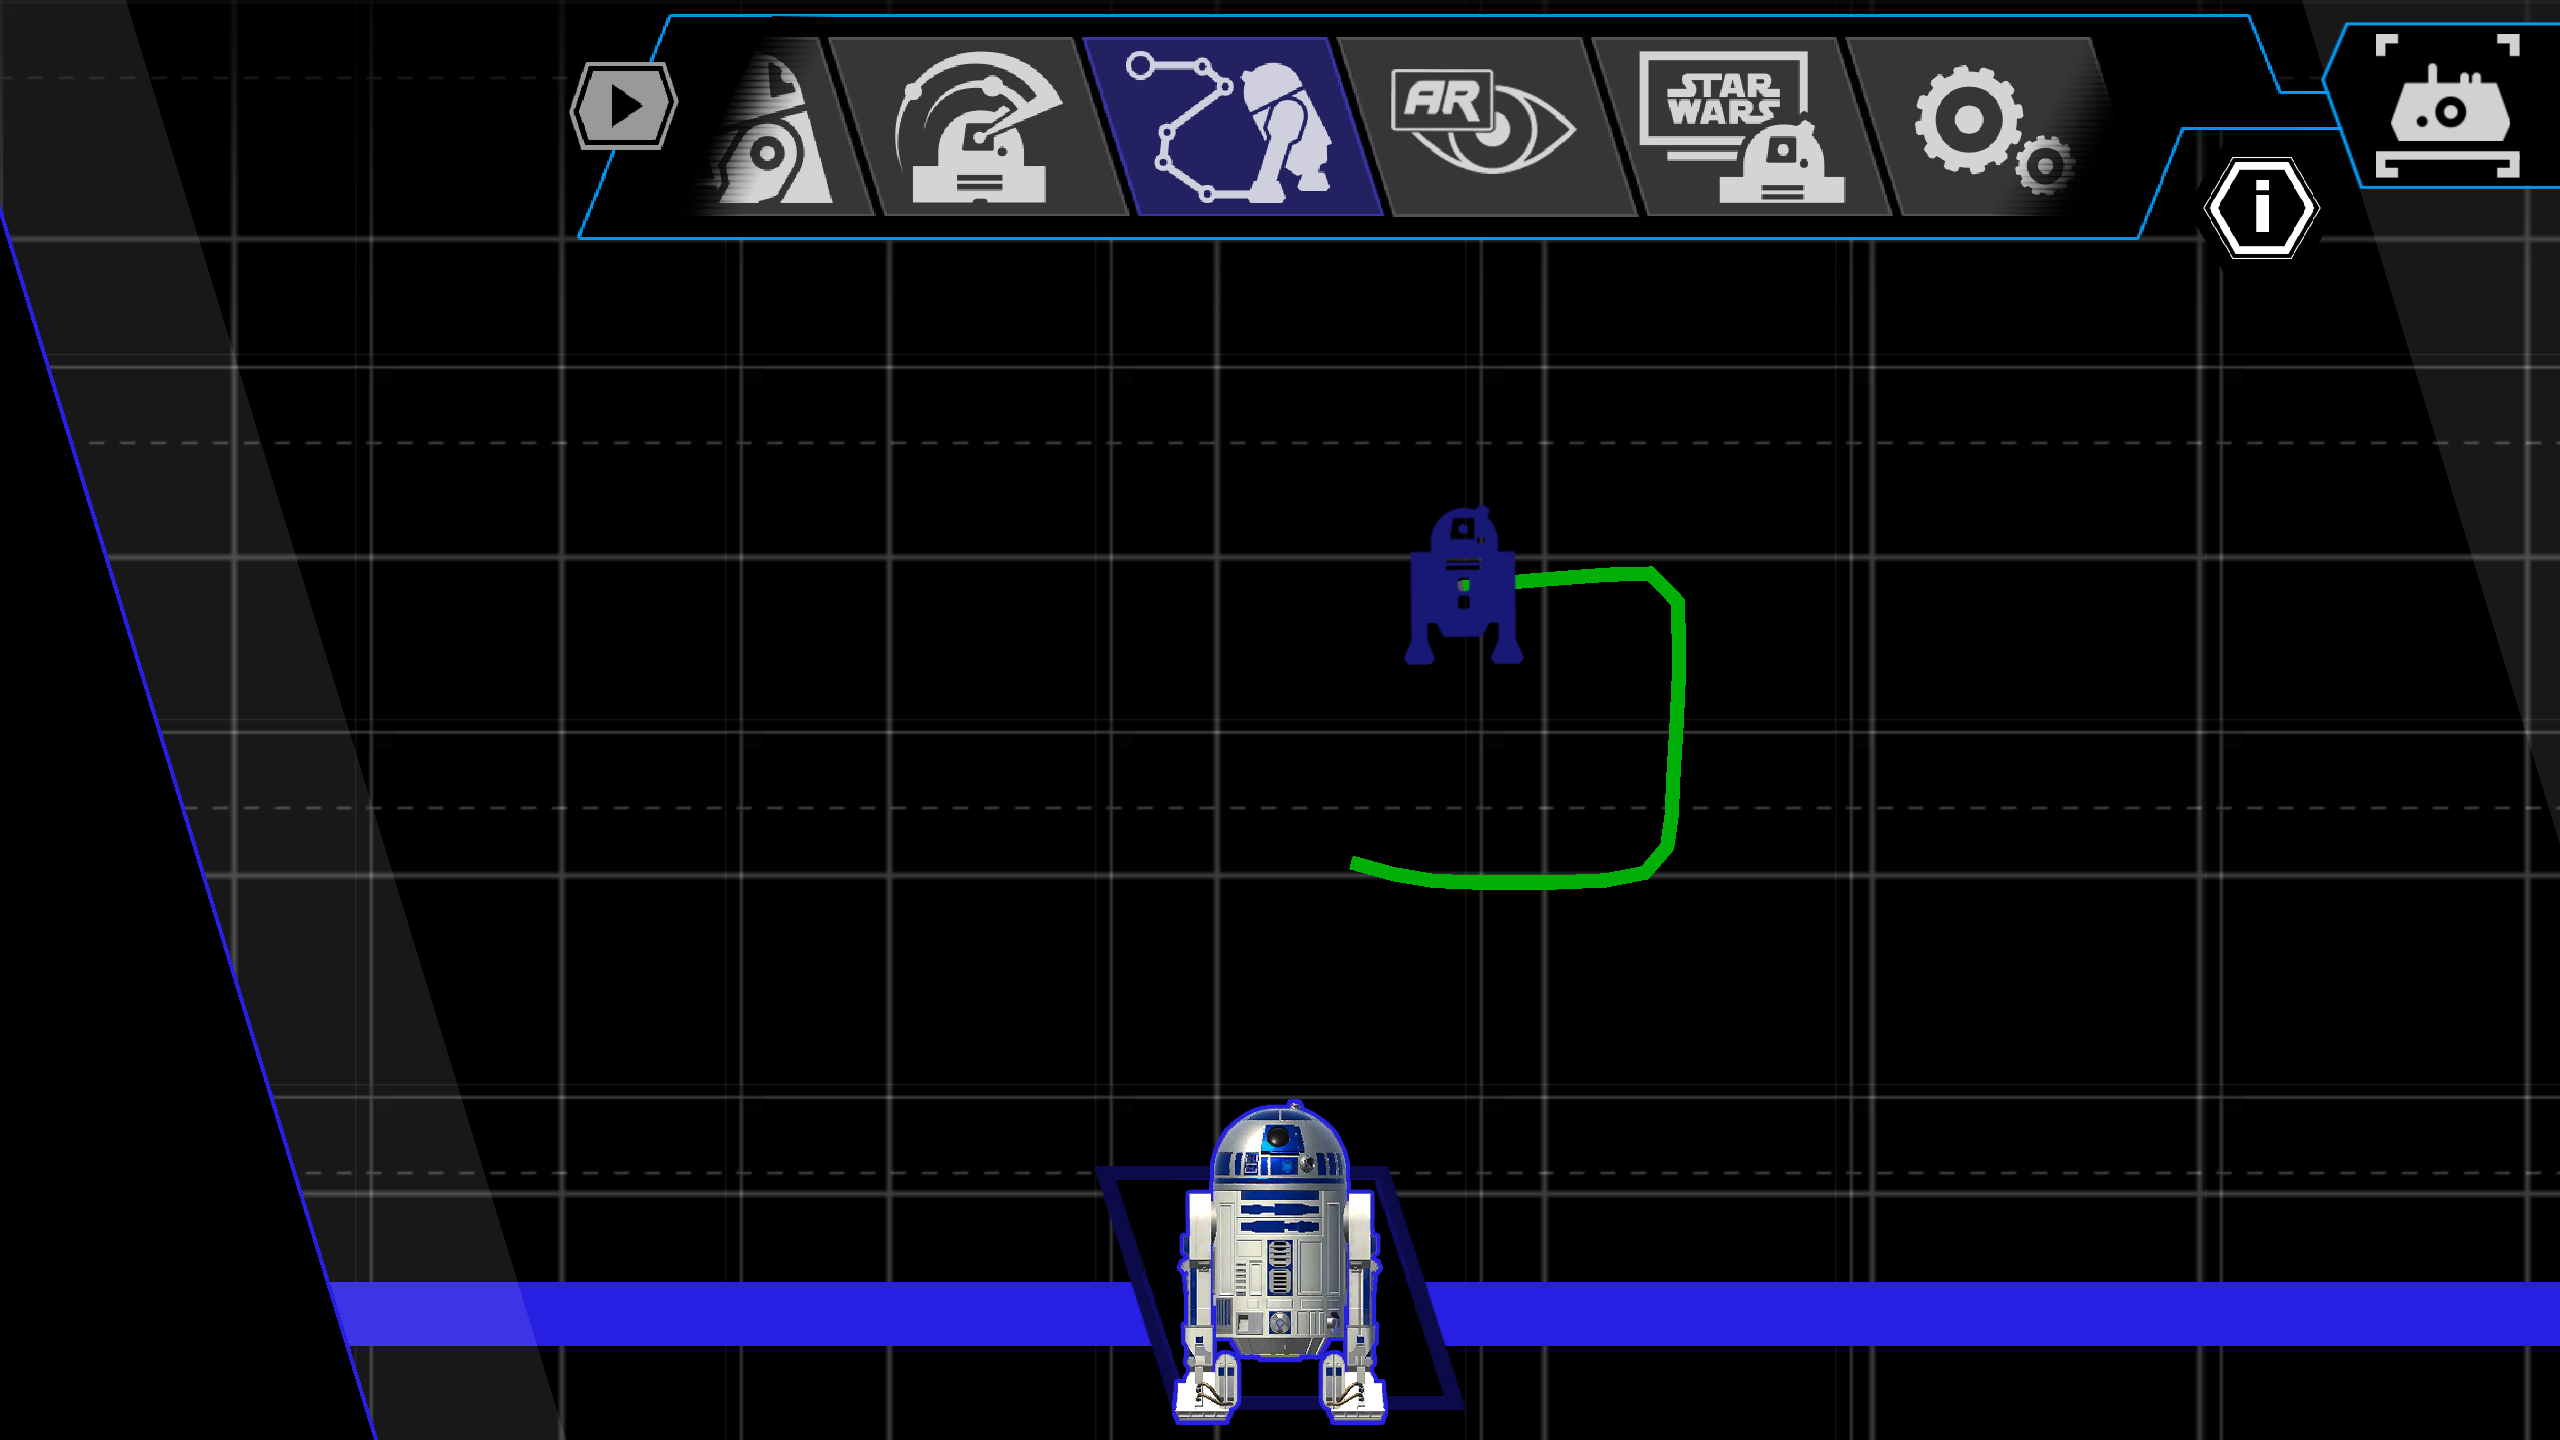 Sphero R2-D2 app with control interface and path-drawing feature.